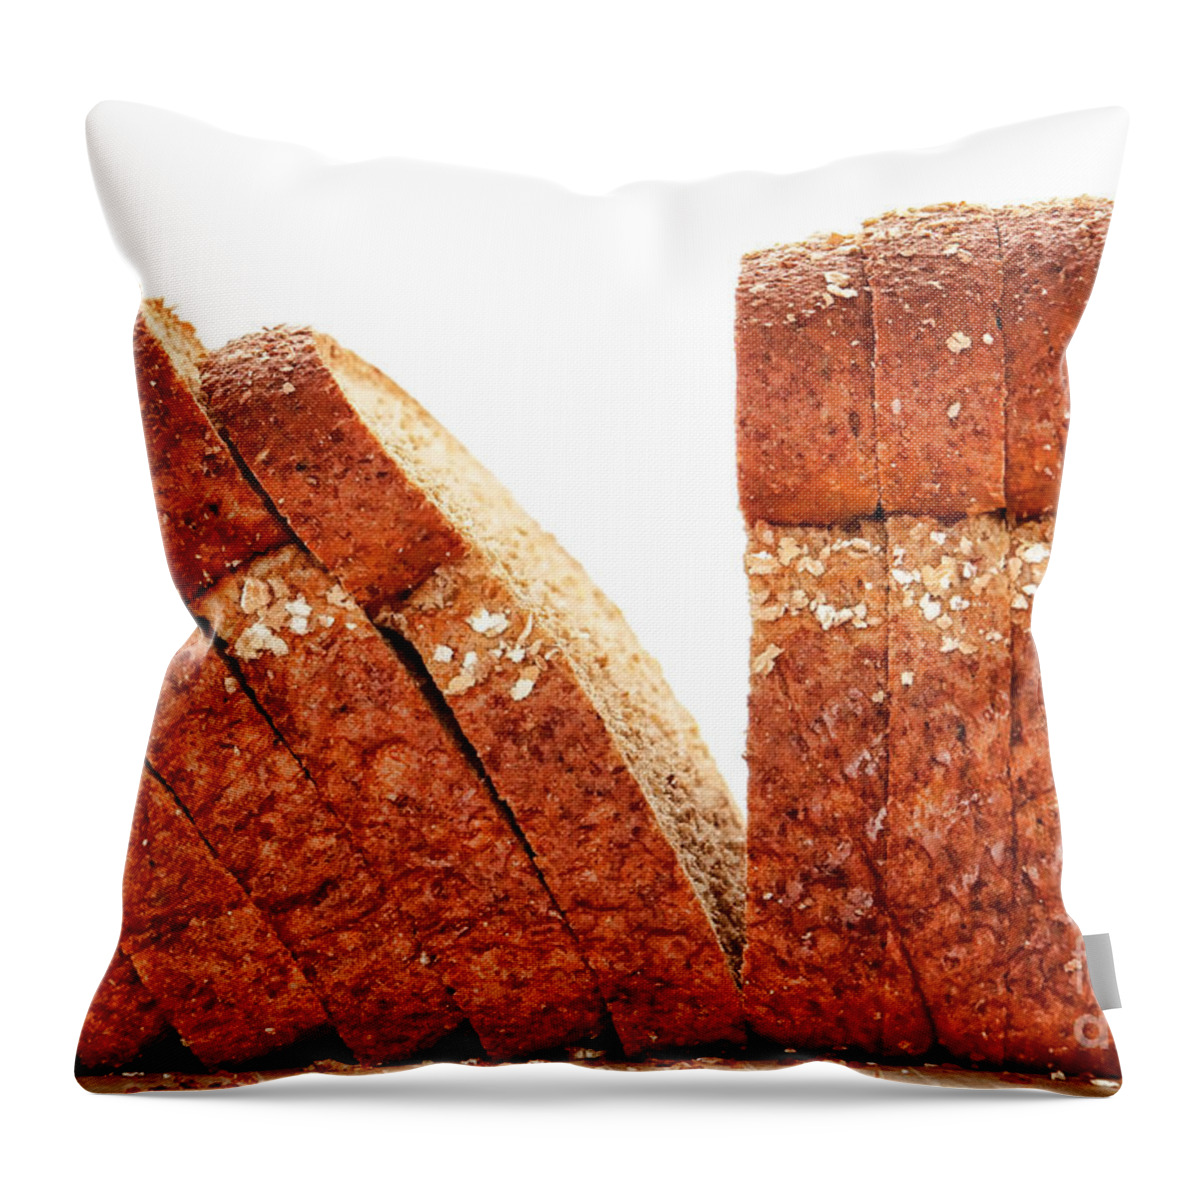 Bread Throw Pillow featuring the photograph Sliced Bread by Olivier Le Queinec